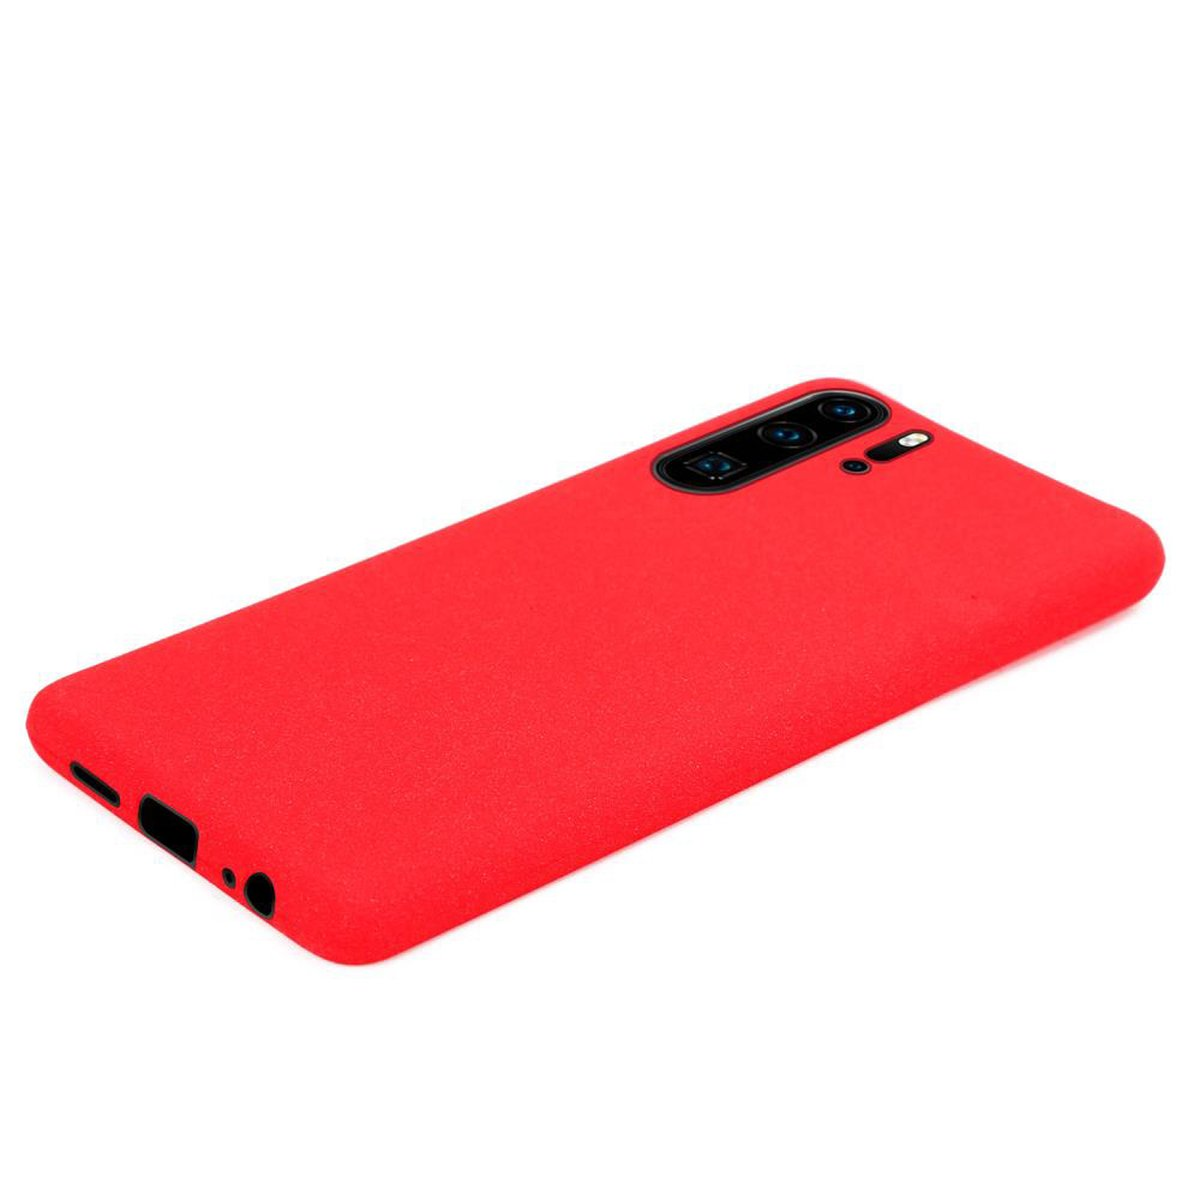 P30 TPU Schutzhülle, ROT Backcover, Huawei, Frosted PRO, CADORABO FROST